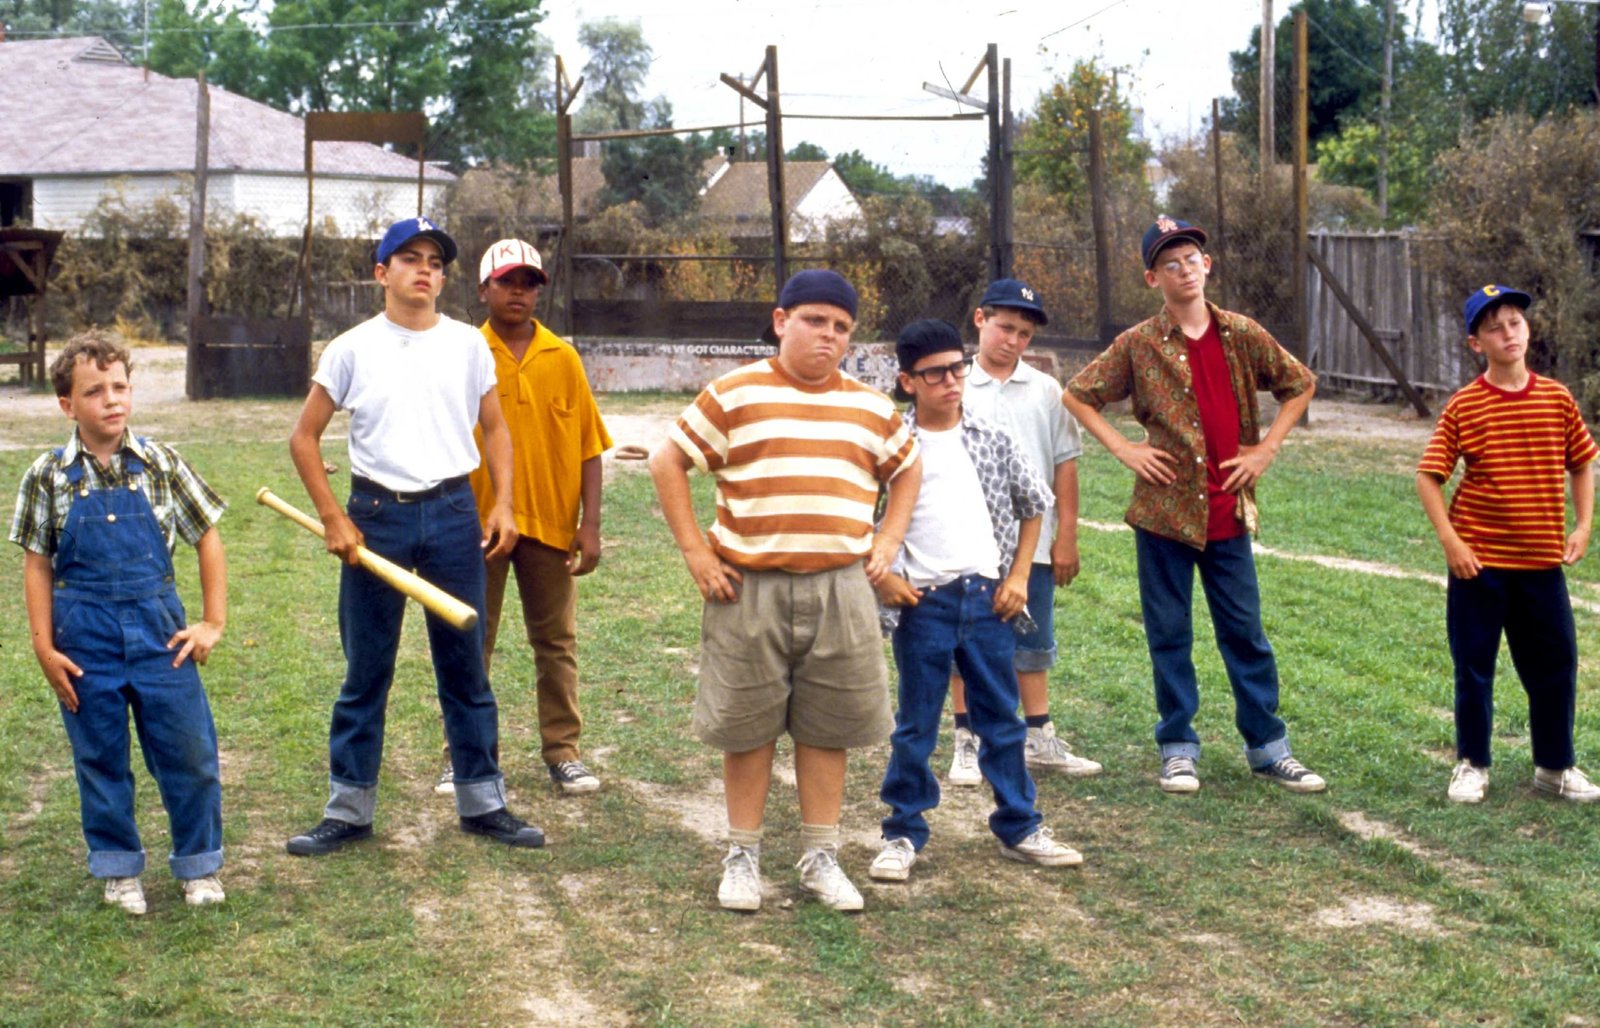 The Sandlot (1993) - Actor Arliss Howard Played Adult Scotty Smalls 